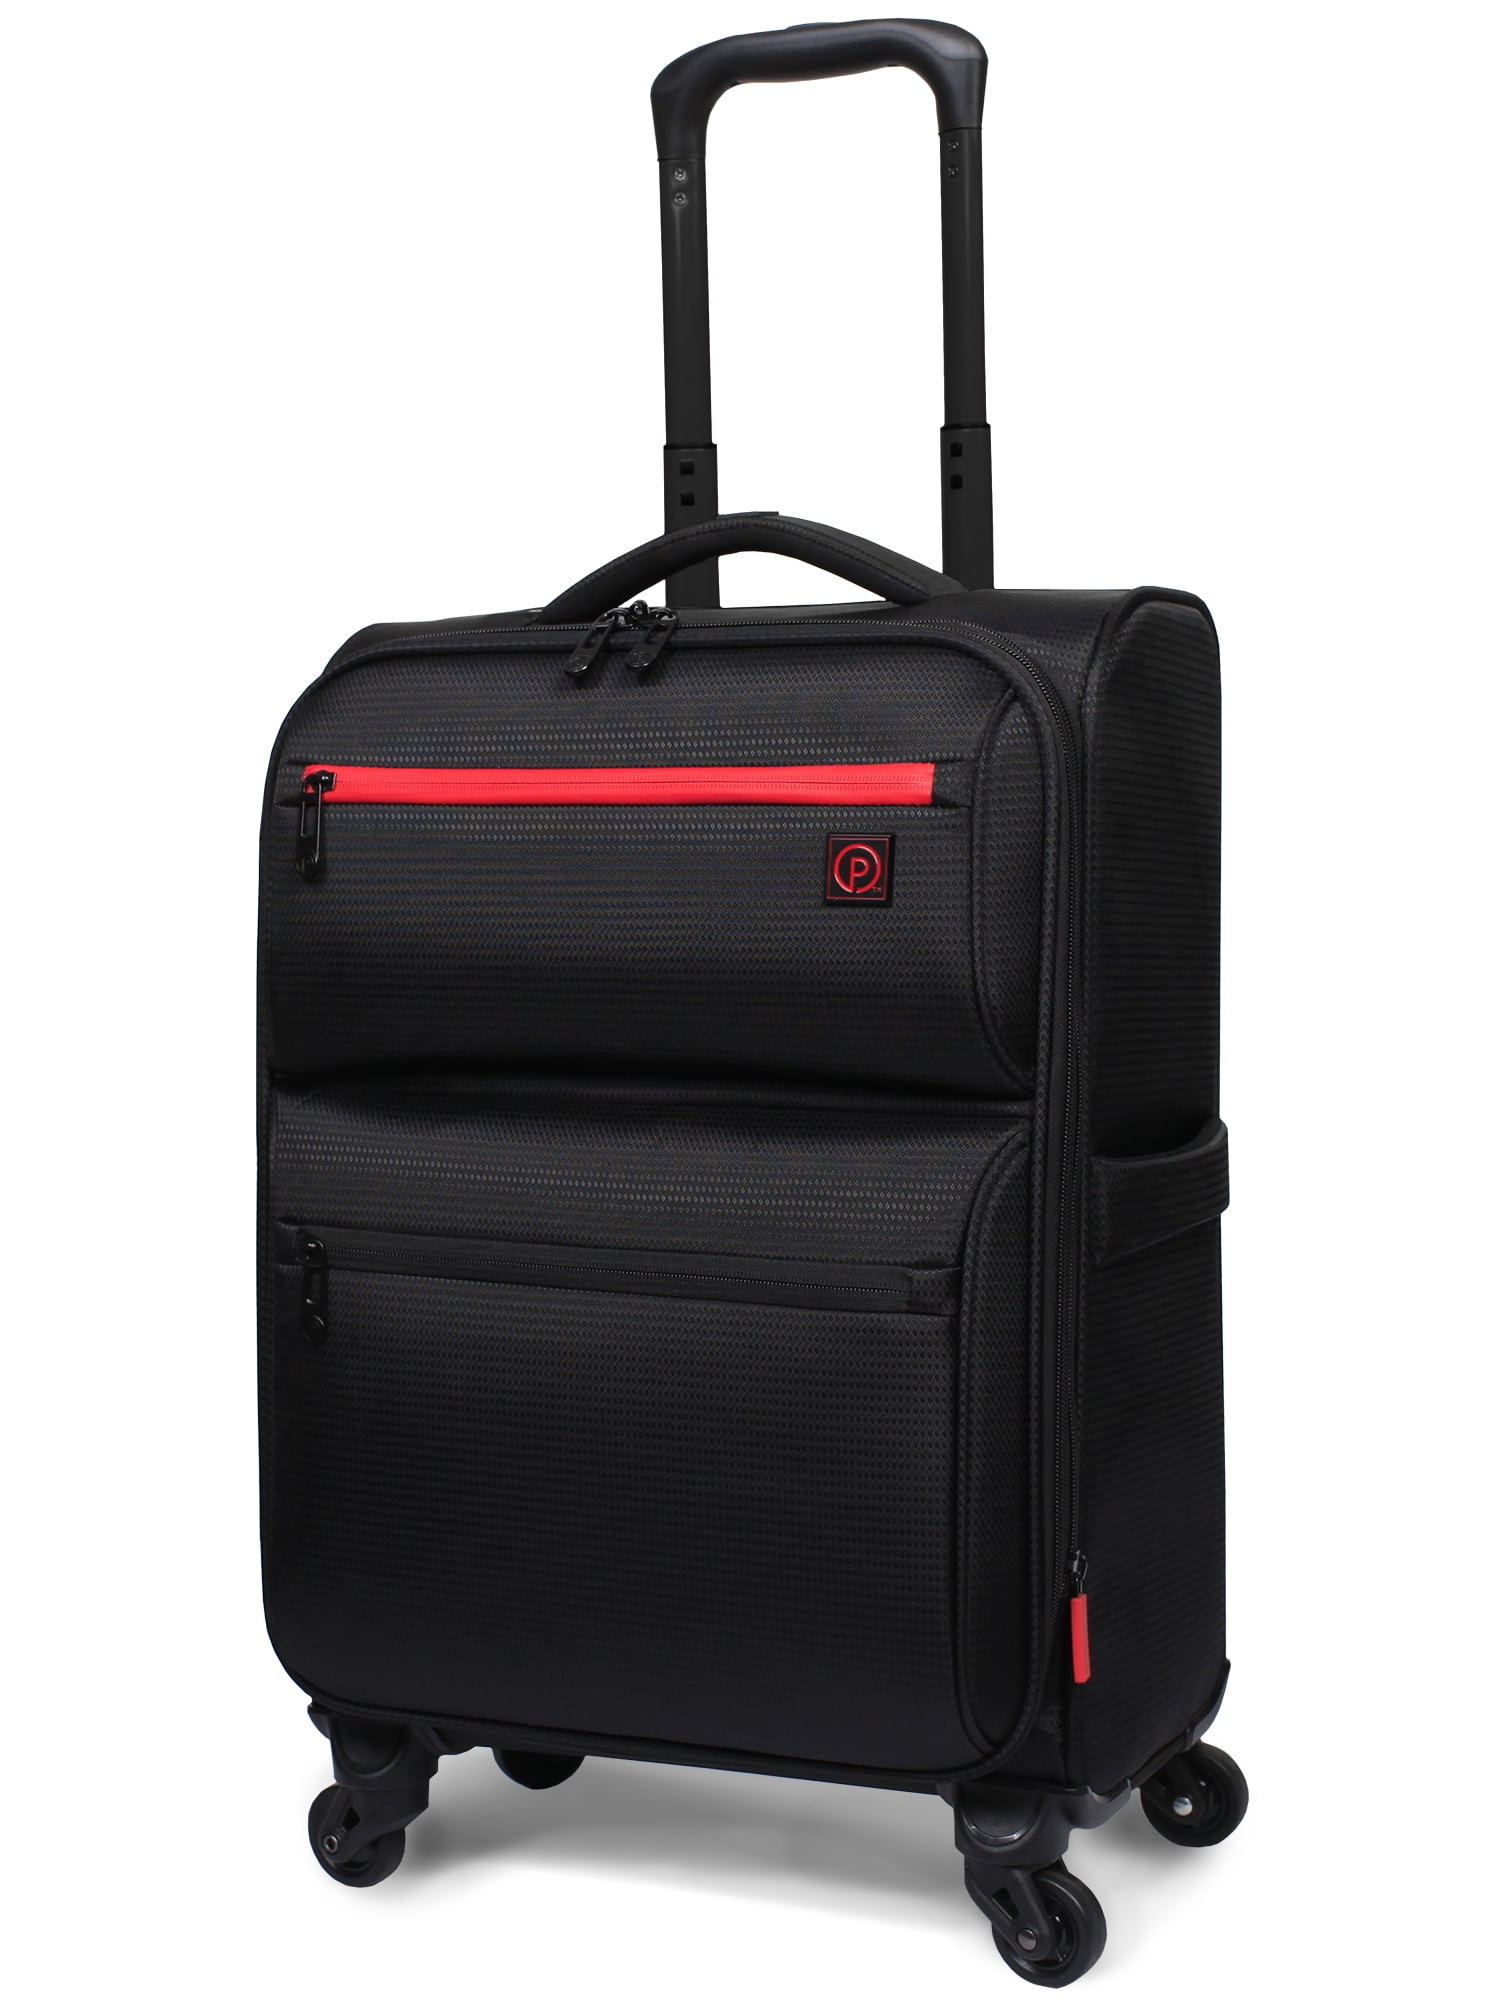 Protege Trulite 20" Lightweight Carry On Luggage Black, 23" x 9" x 14.25", 4.7lbs